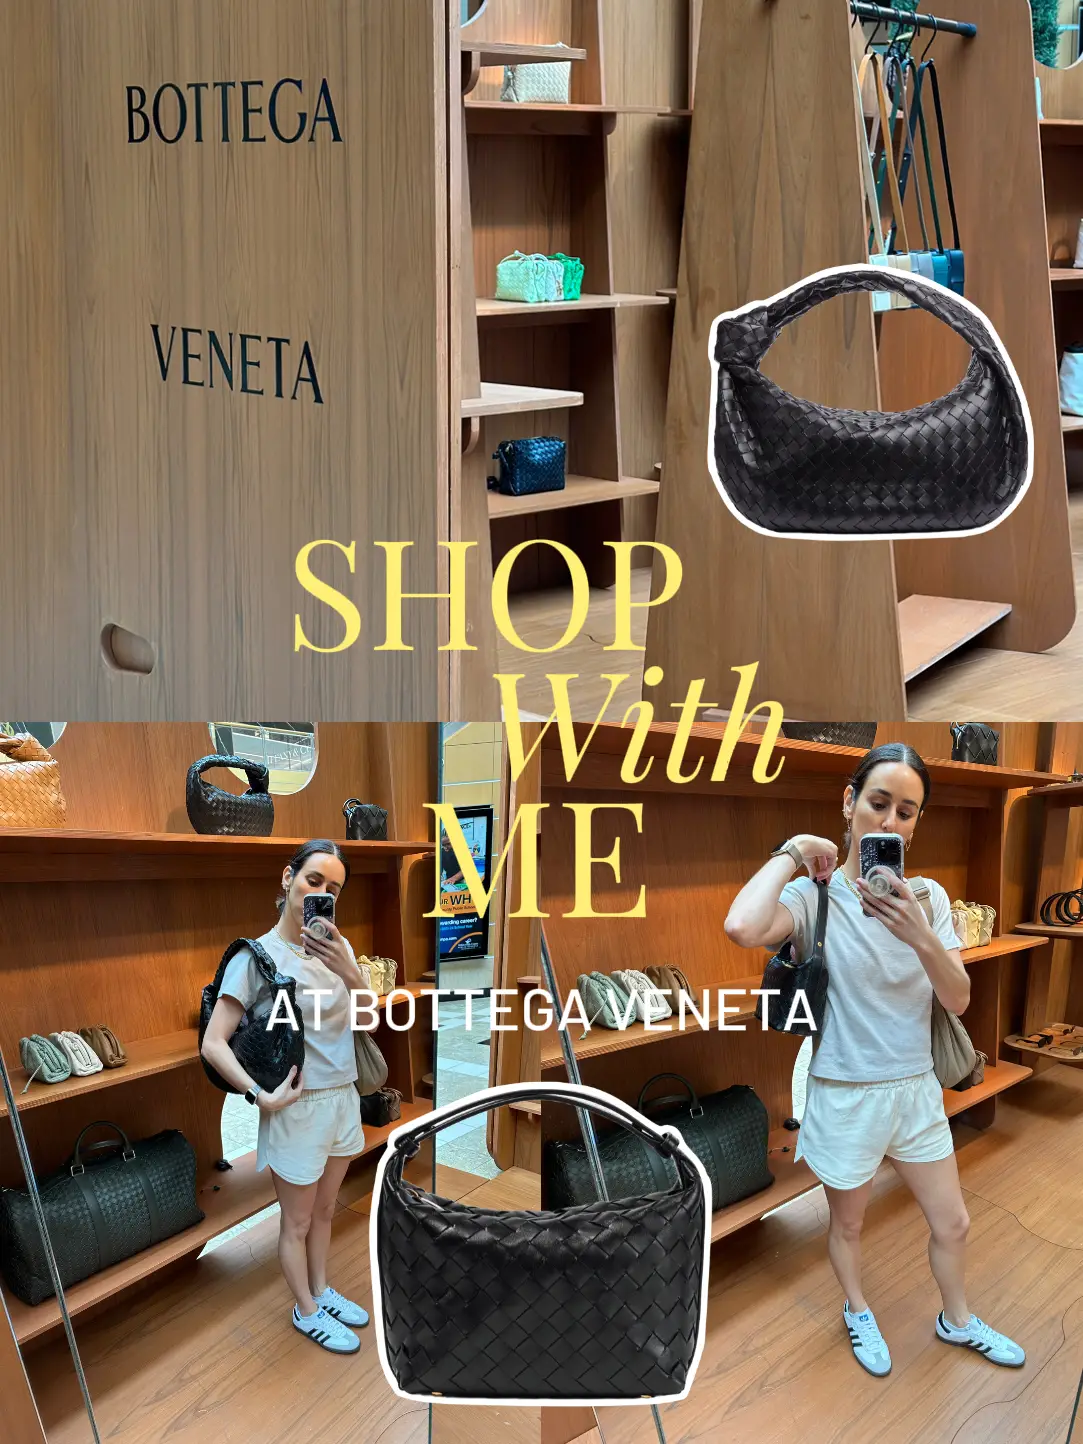 SHOP WITH ME AT BOTTEGA VENETA, Gallery posted by Modeetchien